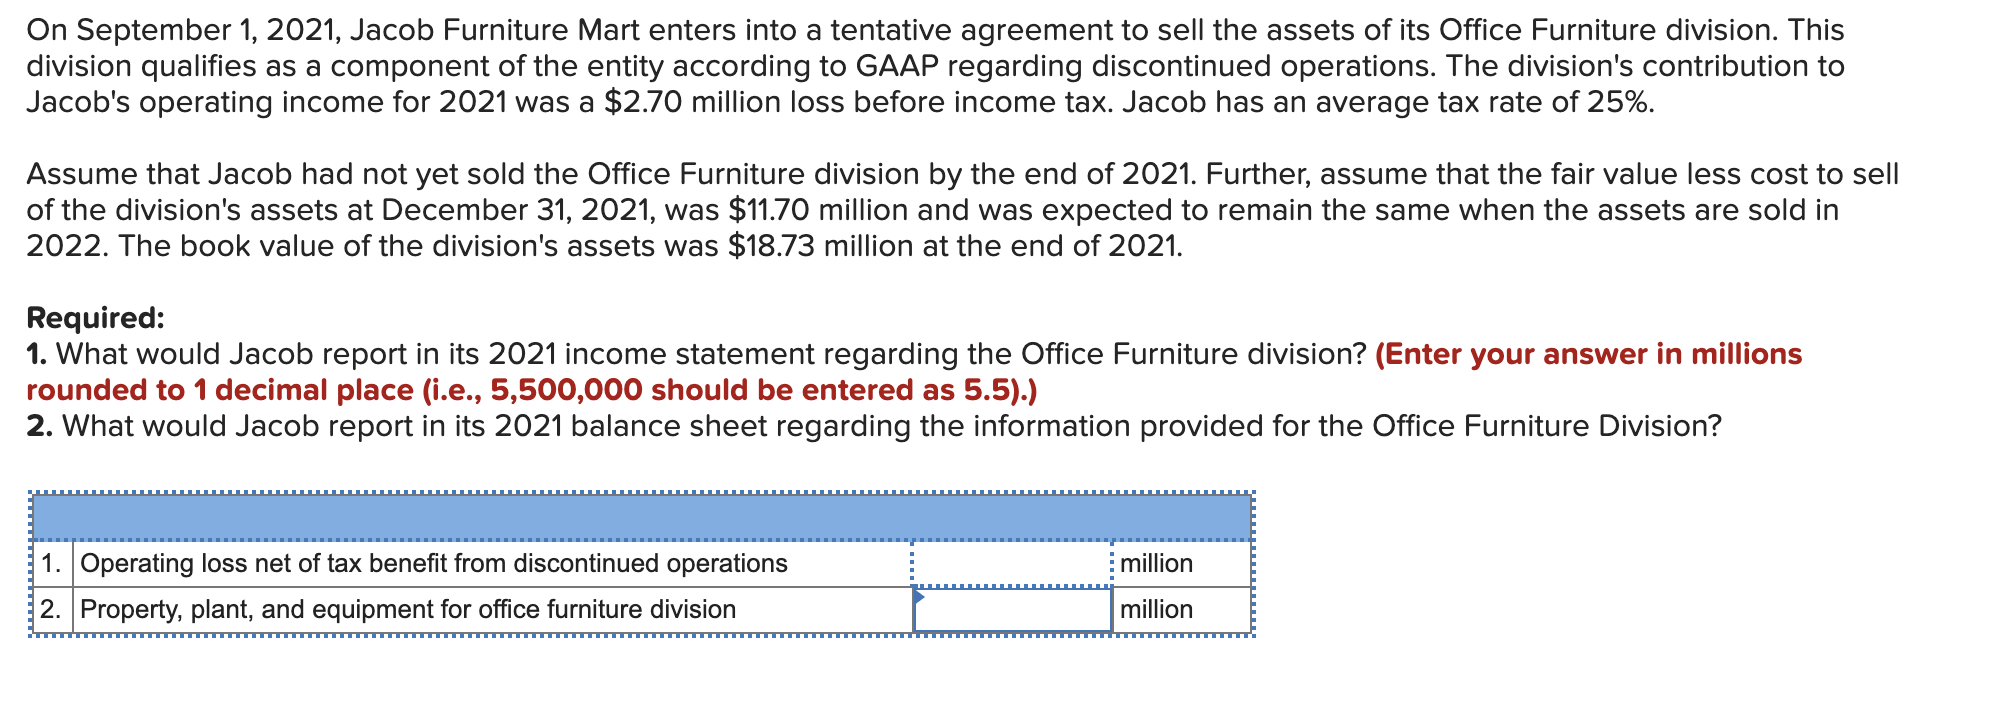 On September 1, 2021, Jacob Furniture Mart enters into a tentative agreement to sell the assets of its Office Furniture divis